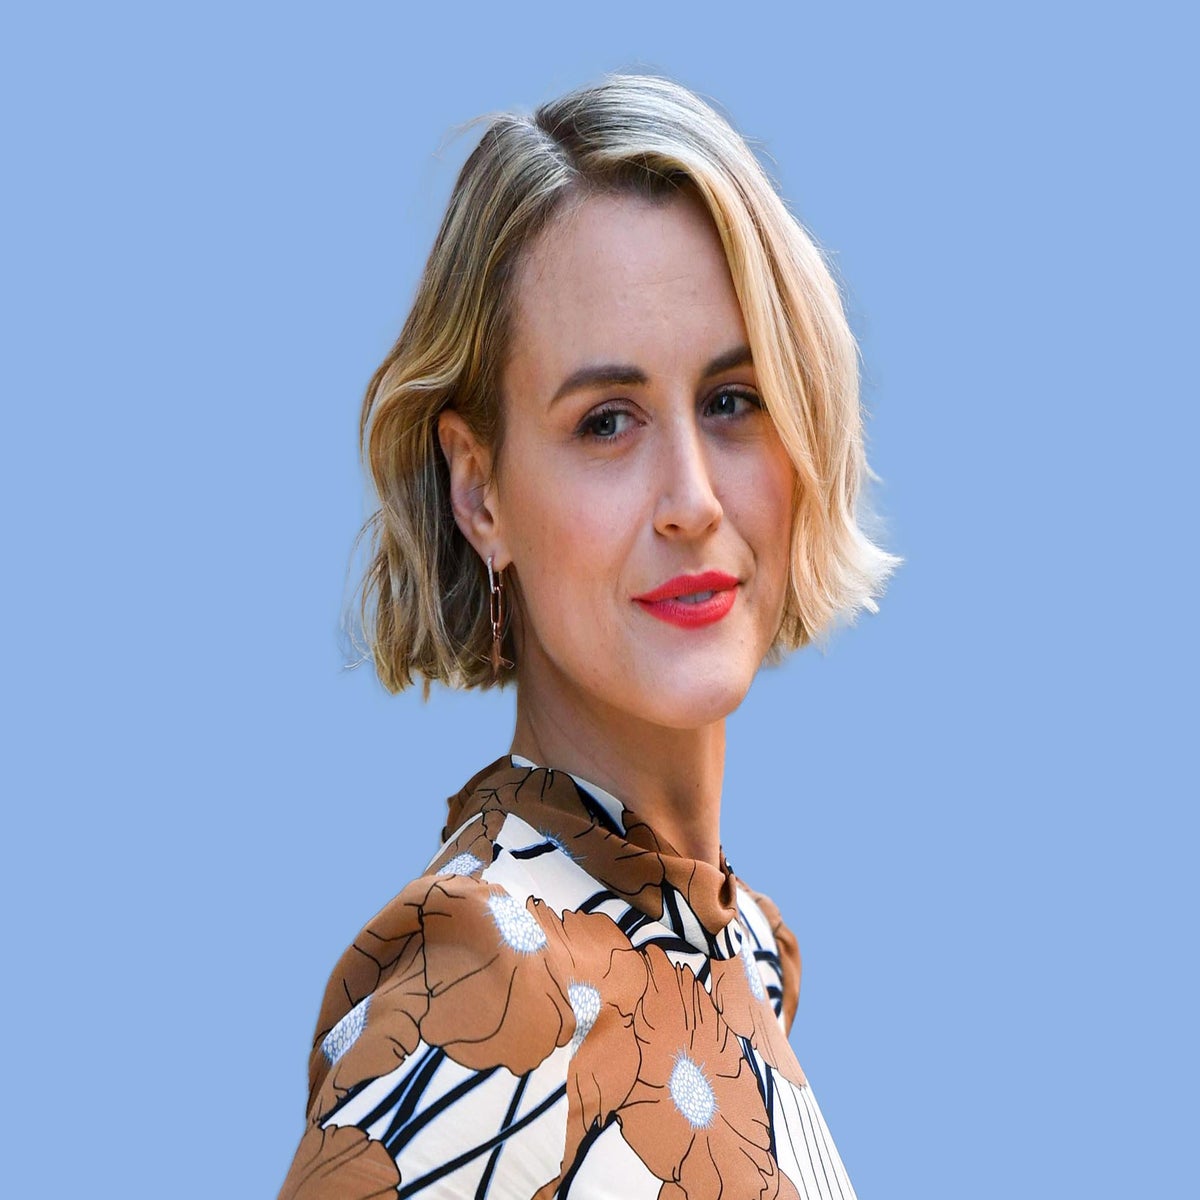 X Vedio Inde Free Hard - Taylor Schilling: 'I started to feel like I was just a space-holder in  Orange is the New Black' | The Independent